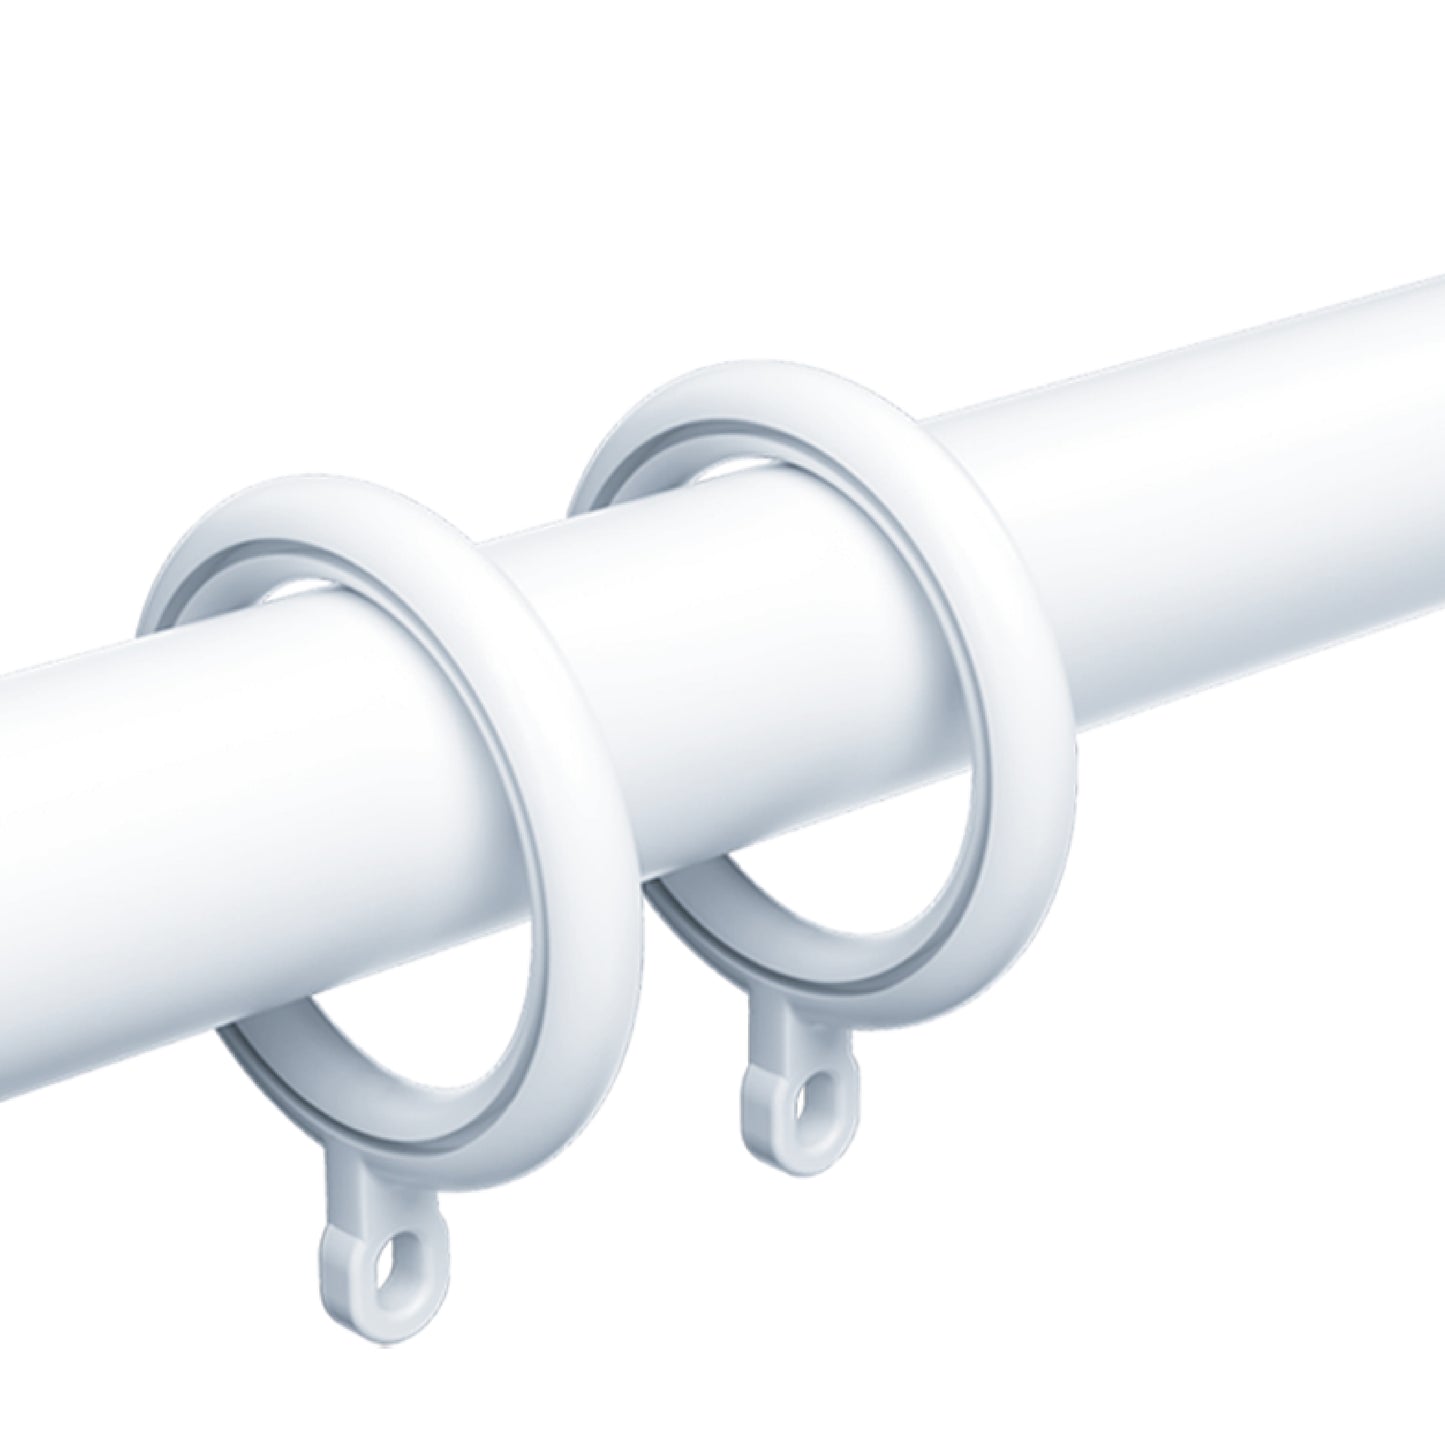 Close-up view of a white Roman rod with durable fluorine-modified finish and integrated curtain ring clips, showcasing effortless operation and robust support